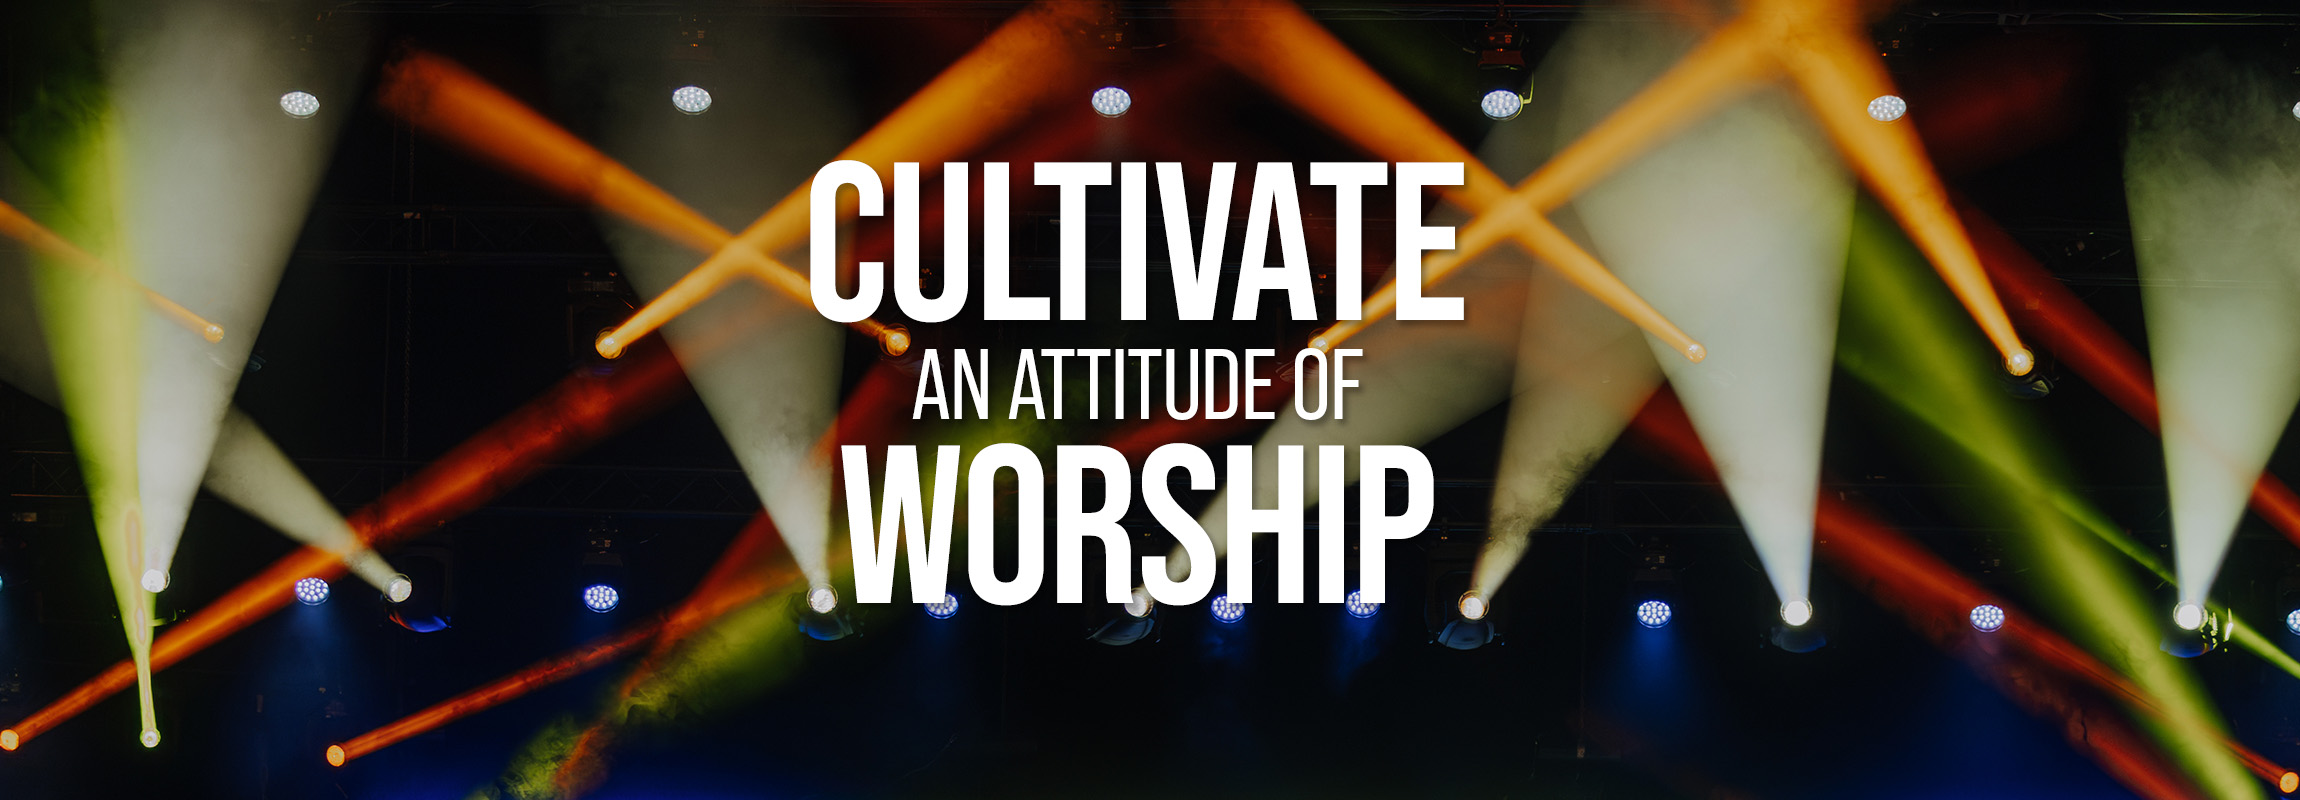 Cultivate an Attitude of Worship